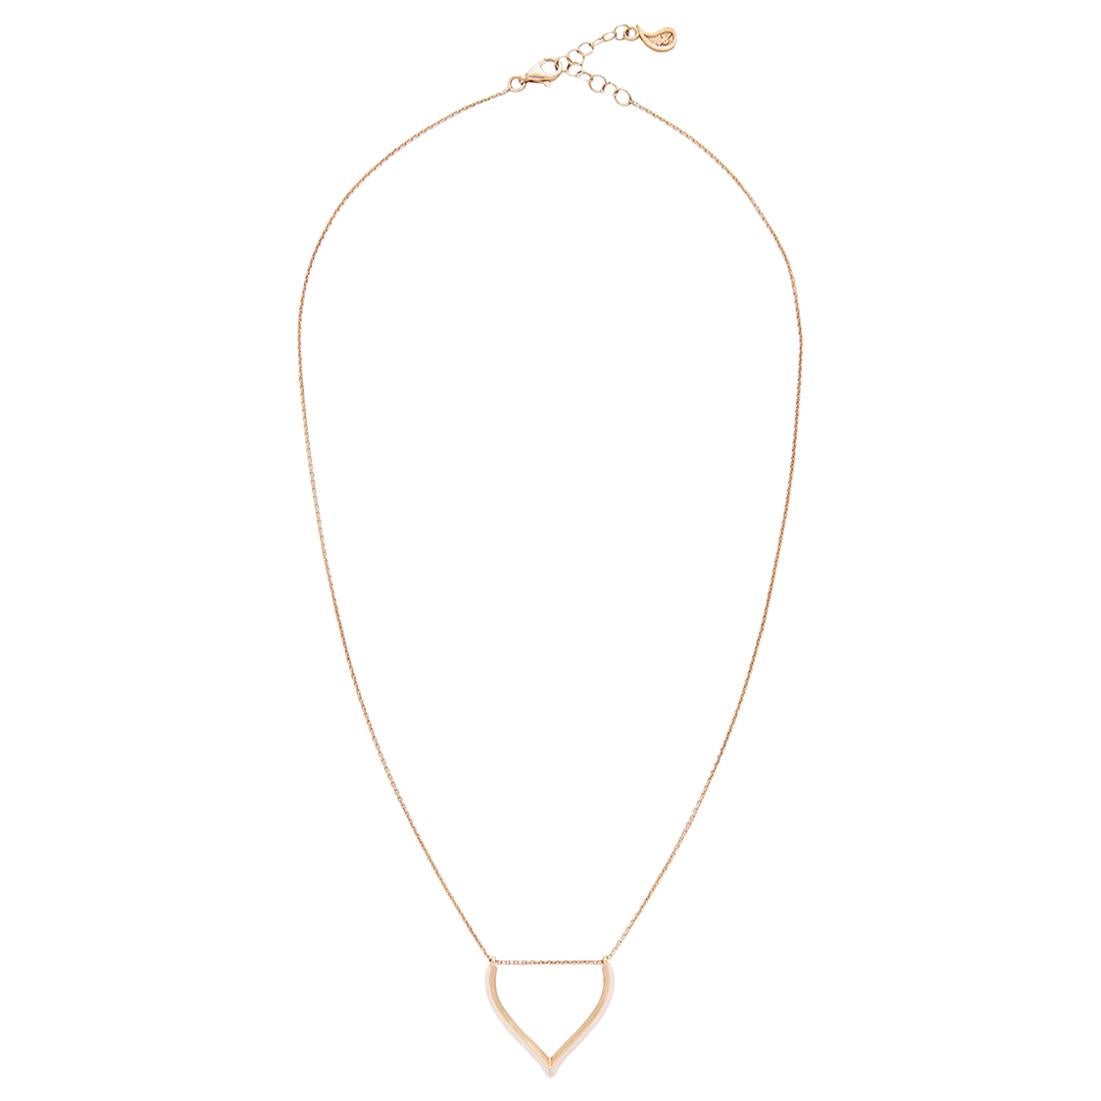 Necklace Chain Classic 18k Gold-Plated Sterling Silver Lotus Shaped Motif Greek For Sale